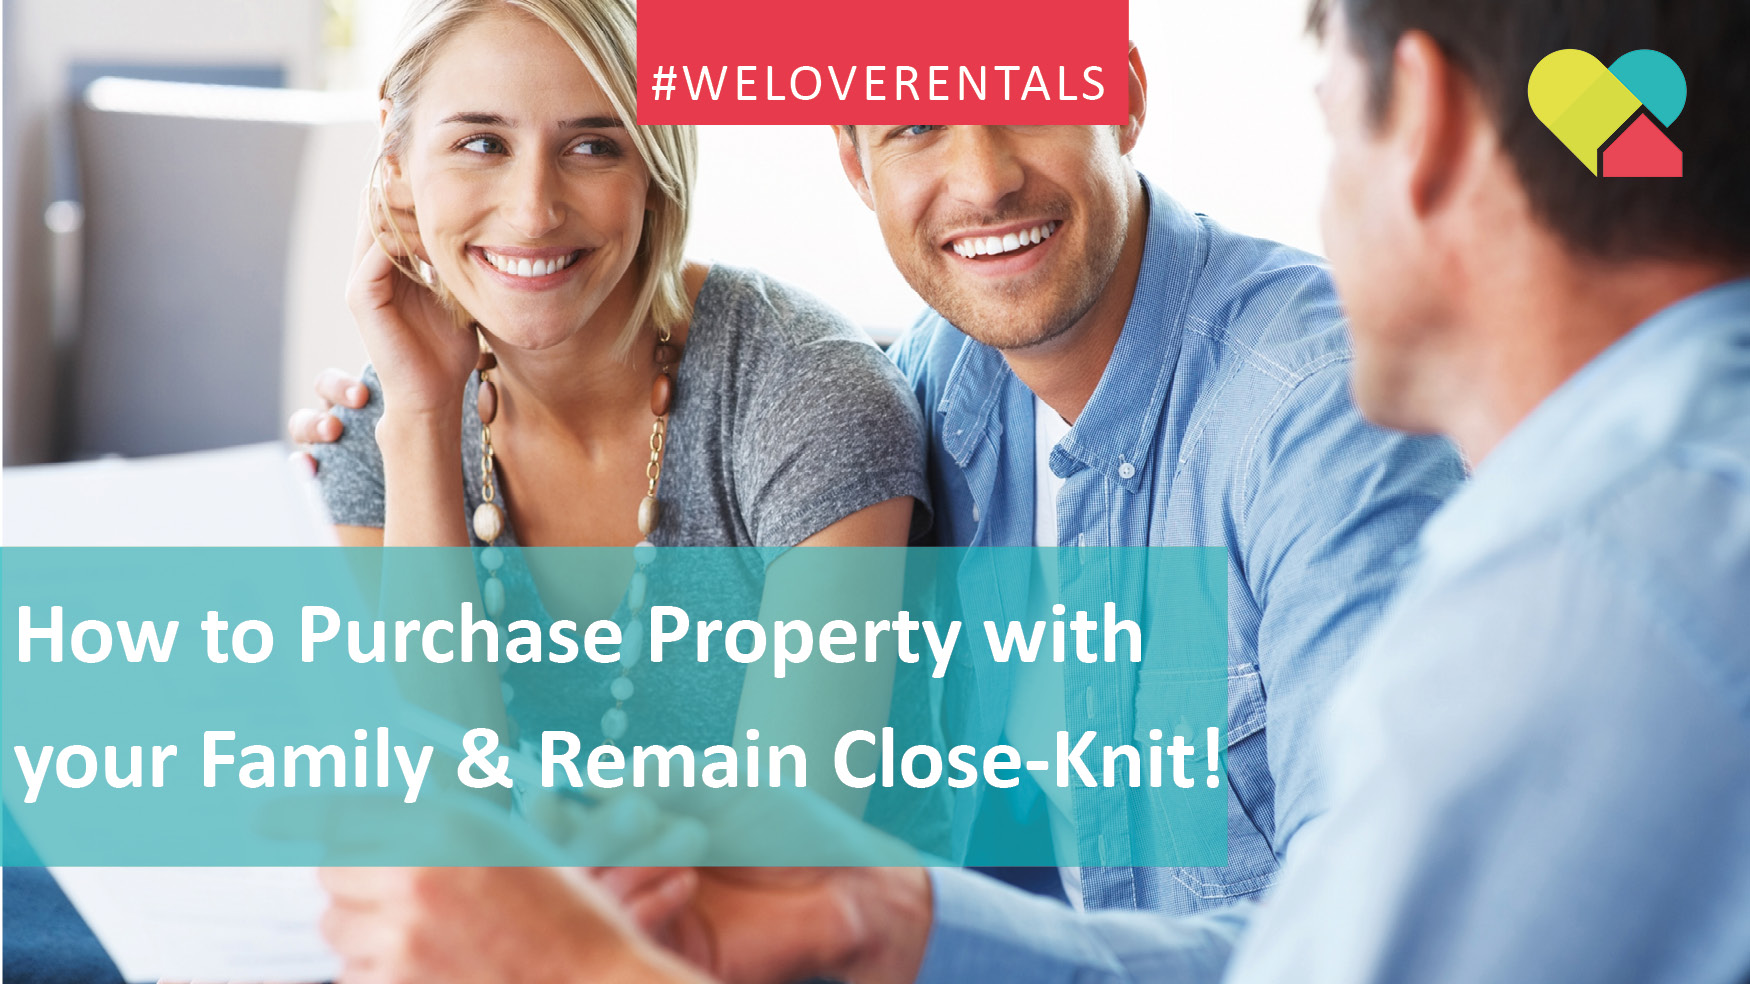 We Love Rentals How to Purchase Property with Your Family